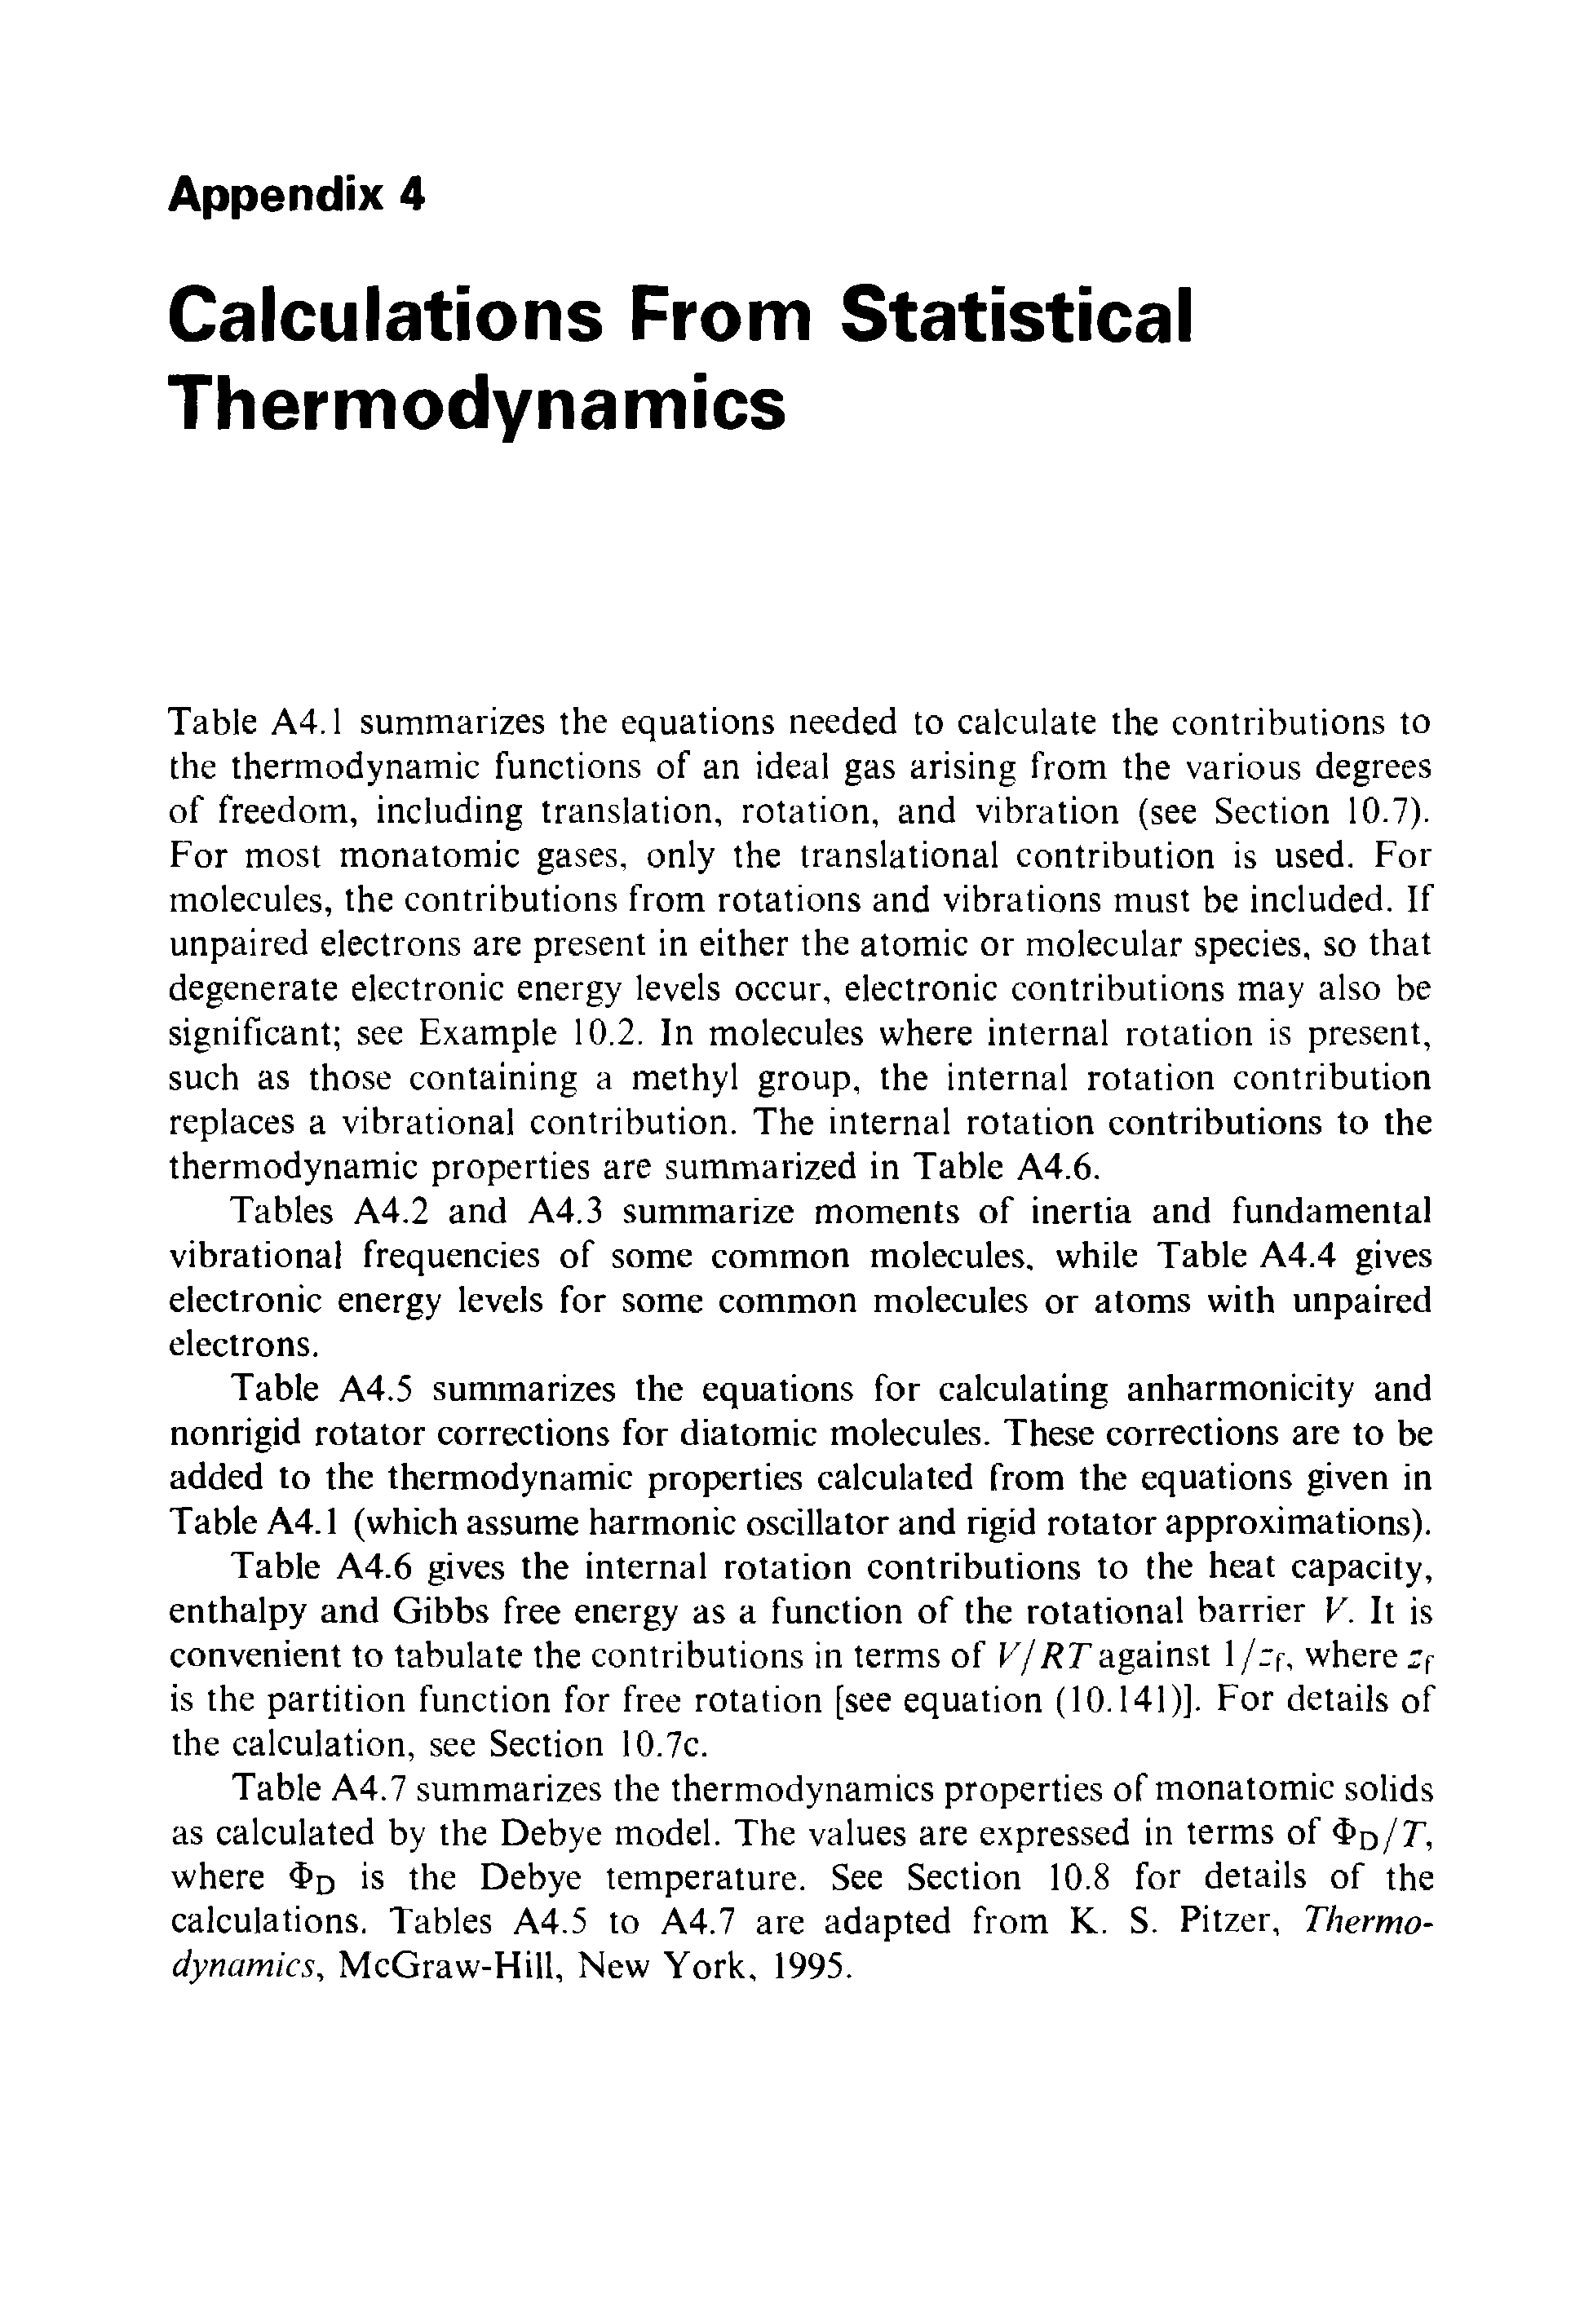 Table A4.1 summarizes the equations needed to calculate the contributions to the thermodynamic functions of an ideal gas arising from the various degrees of freedom, including translation, rotation, and vibration (see Section 10.7). For most monatomic gases, only the translational contribution is used. For molecules, the contributions from rotations and vibrations must be included. If unpaired electrons are present in either the atomic or molecular species, so that degenerate electronic energy levels occur, electronic contributions may also be significant see Example 10.2. In molecules where internal rotation is present, such as those containing a methyl group, the internal rotation contribution replaces a vibrational contribution. The internal rotation contributions to the thermodynamic properties are summarized in Table A4.6.